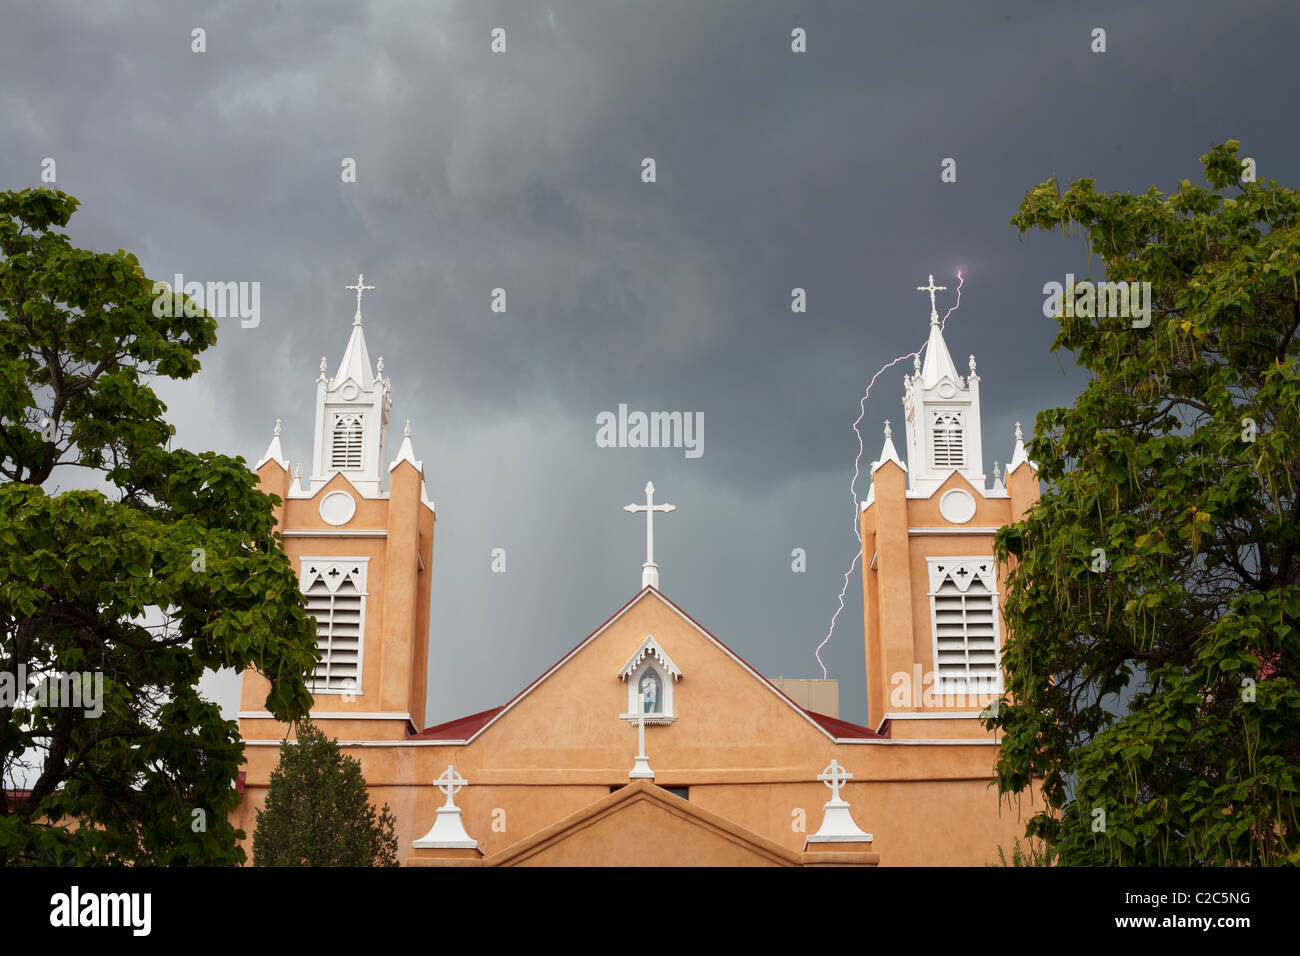 San Felipe de Neri Church in old town Albuquerque. A daylight flash of lightning is striking behind the church. Bernalillo County, New Mexico, USA. Stock Photo